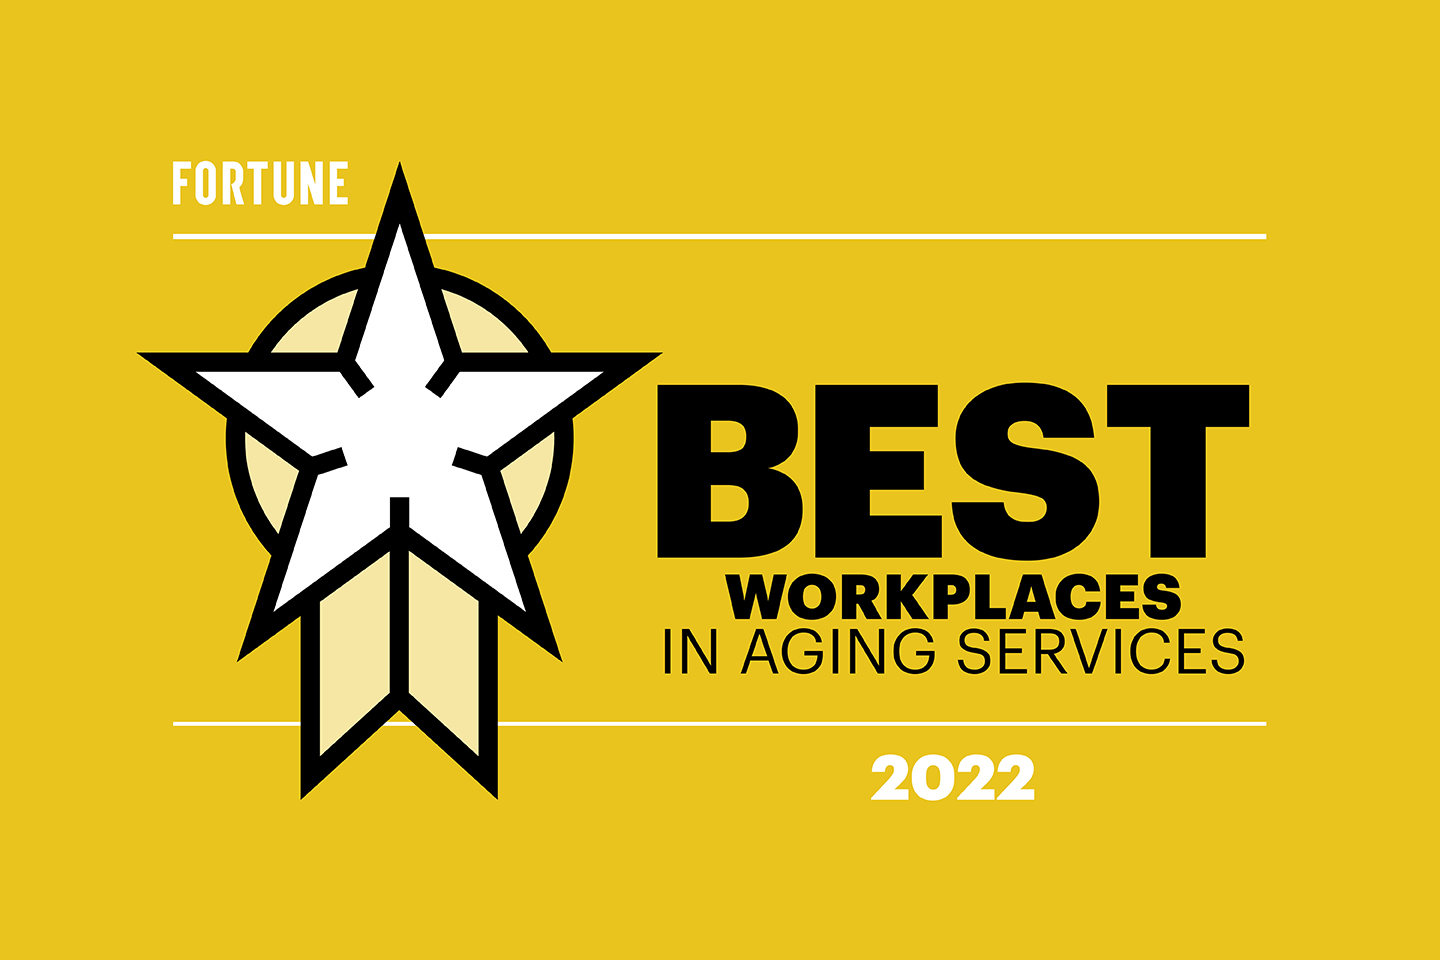 25 Best Small and Medium Workplaces in Aging Services: Senior Housing and Care